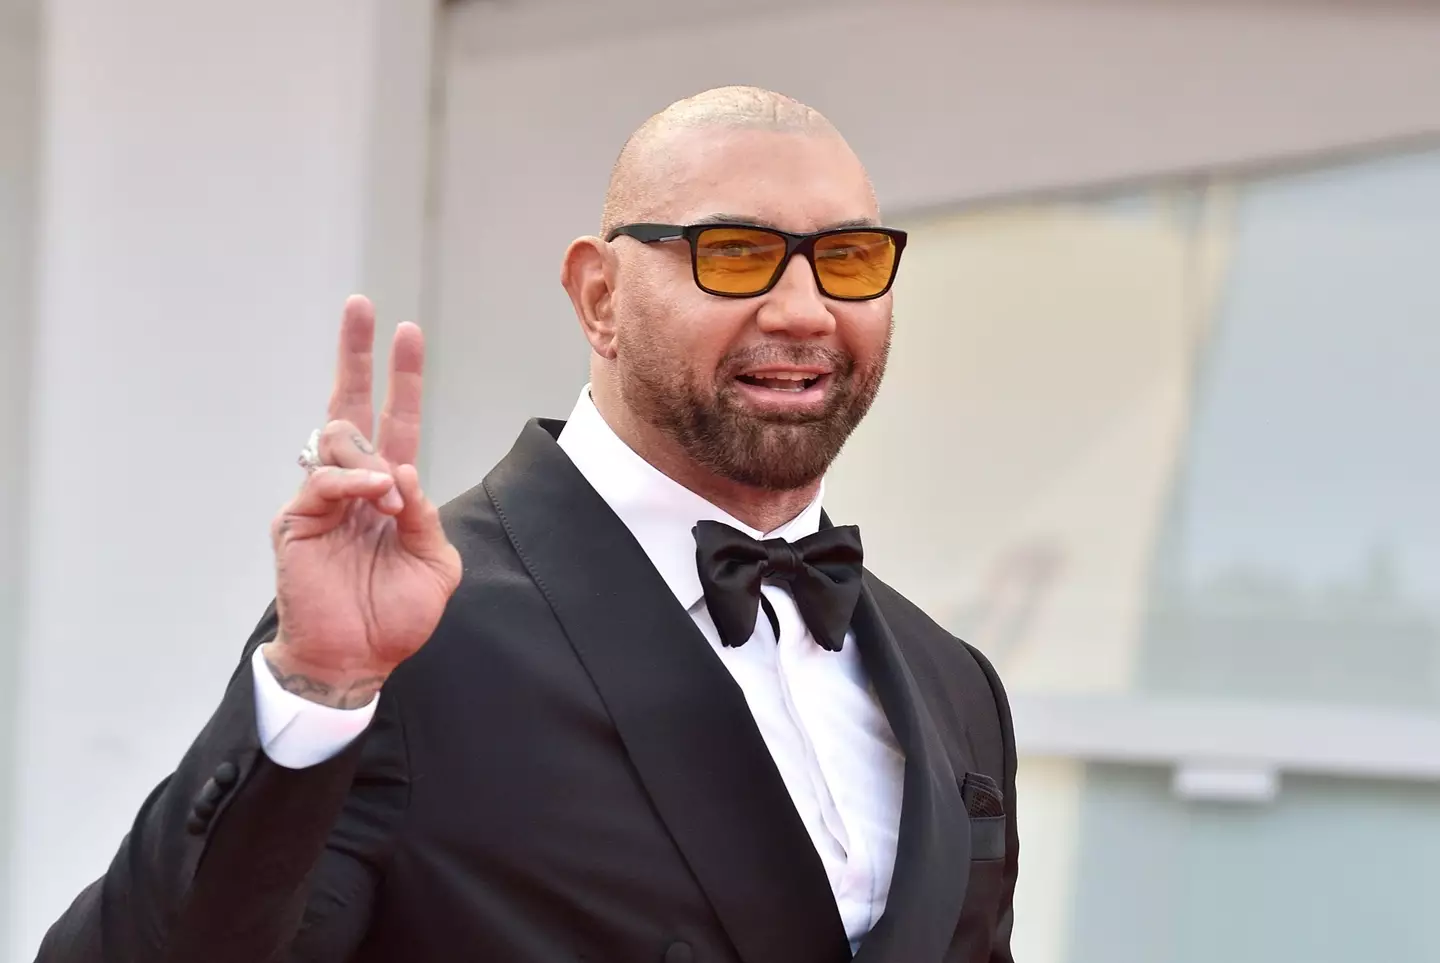 Dave Bautista has had conversations with James Gunn about Bane.